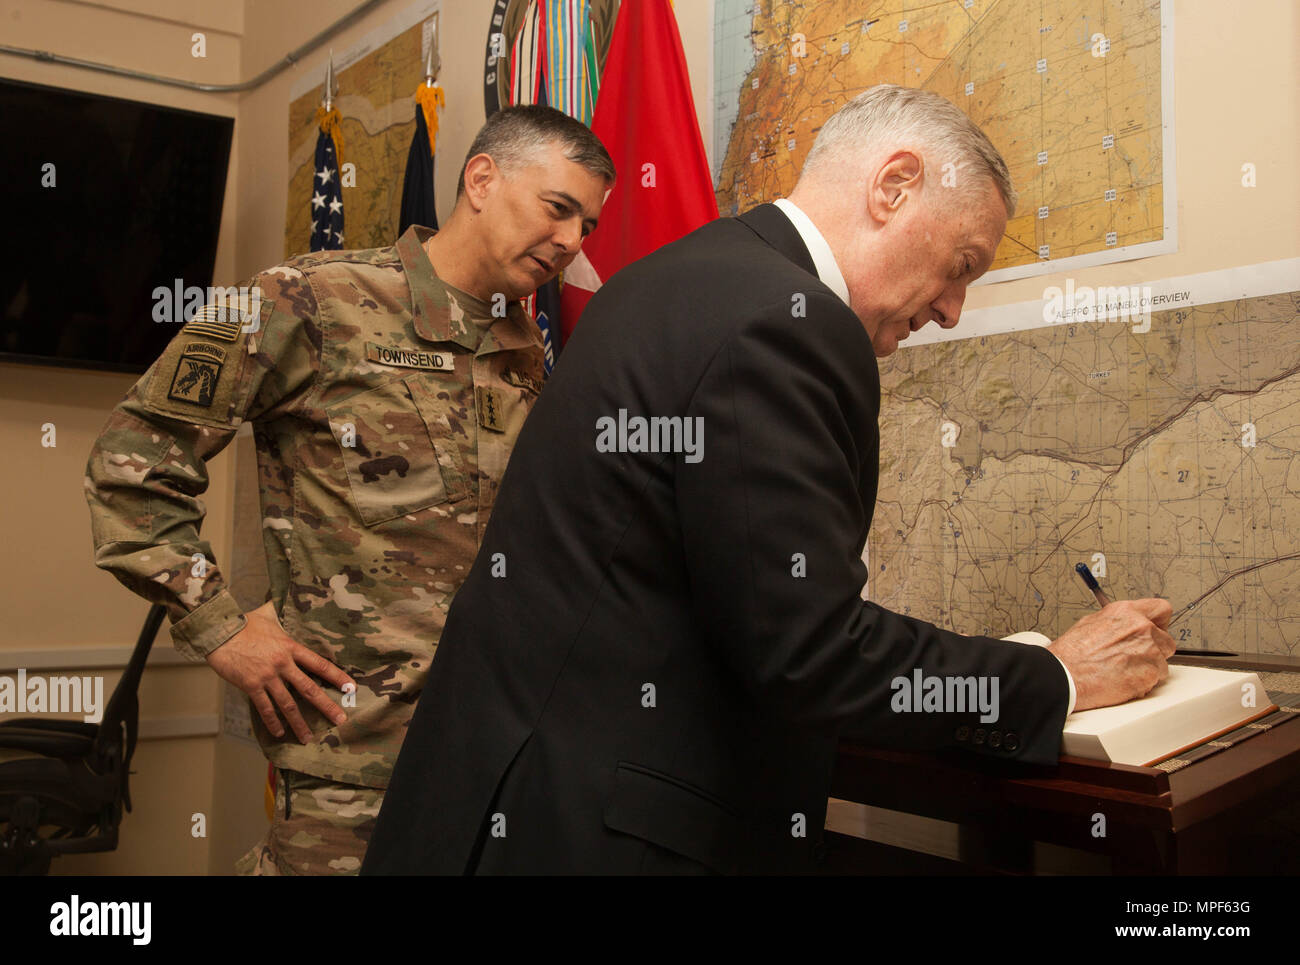 The Honorable James Mattis, United States Secretary of Defense, signs U.S. Army Maj. Gen. Townsend's guest book during his inaugural visit to Iraq in support of Operation Inherent Resolve in Baghdad, Iraq, Feb. 20, 2017. The breadth and diversity of partners supporting the Coalition demonstrate the global and unified nature of the endeavor to defeat ISIS in Iraq and Syria. (U.S. Army photo by Sgt. Joshua Wooten) Stock Photo